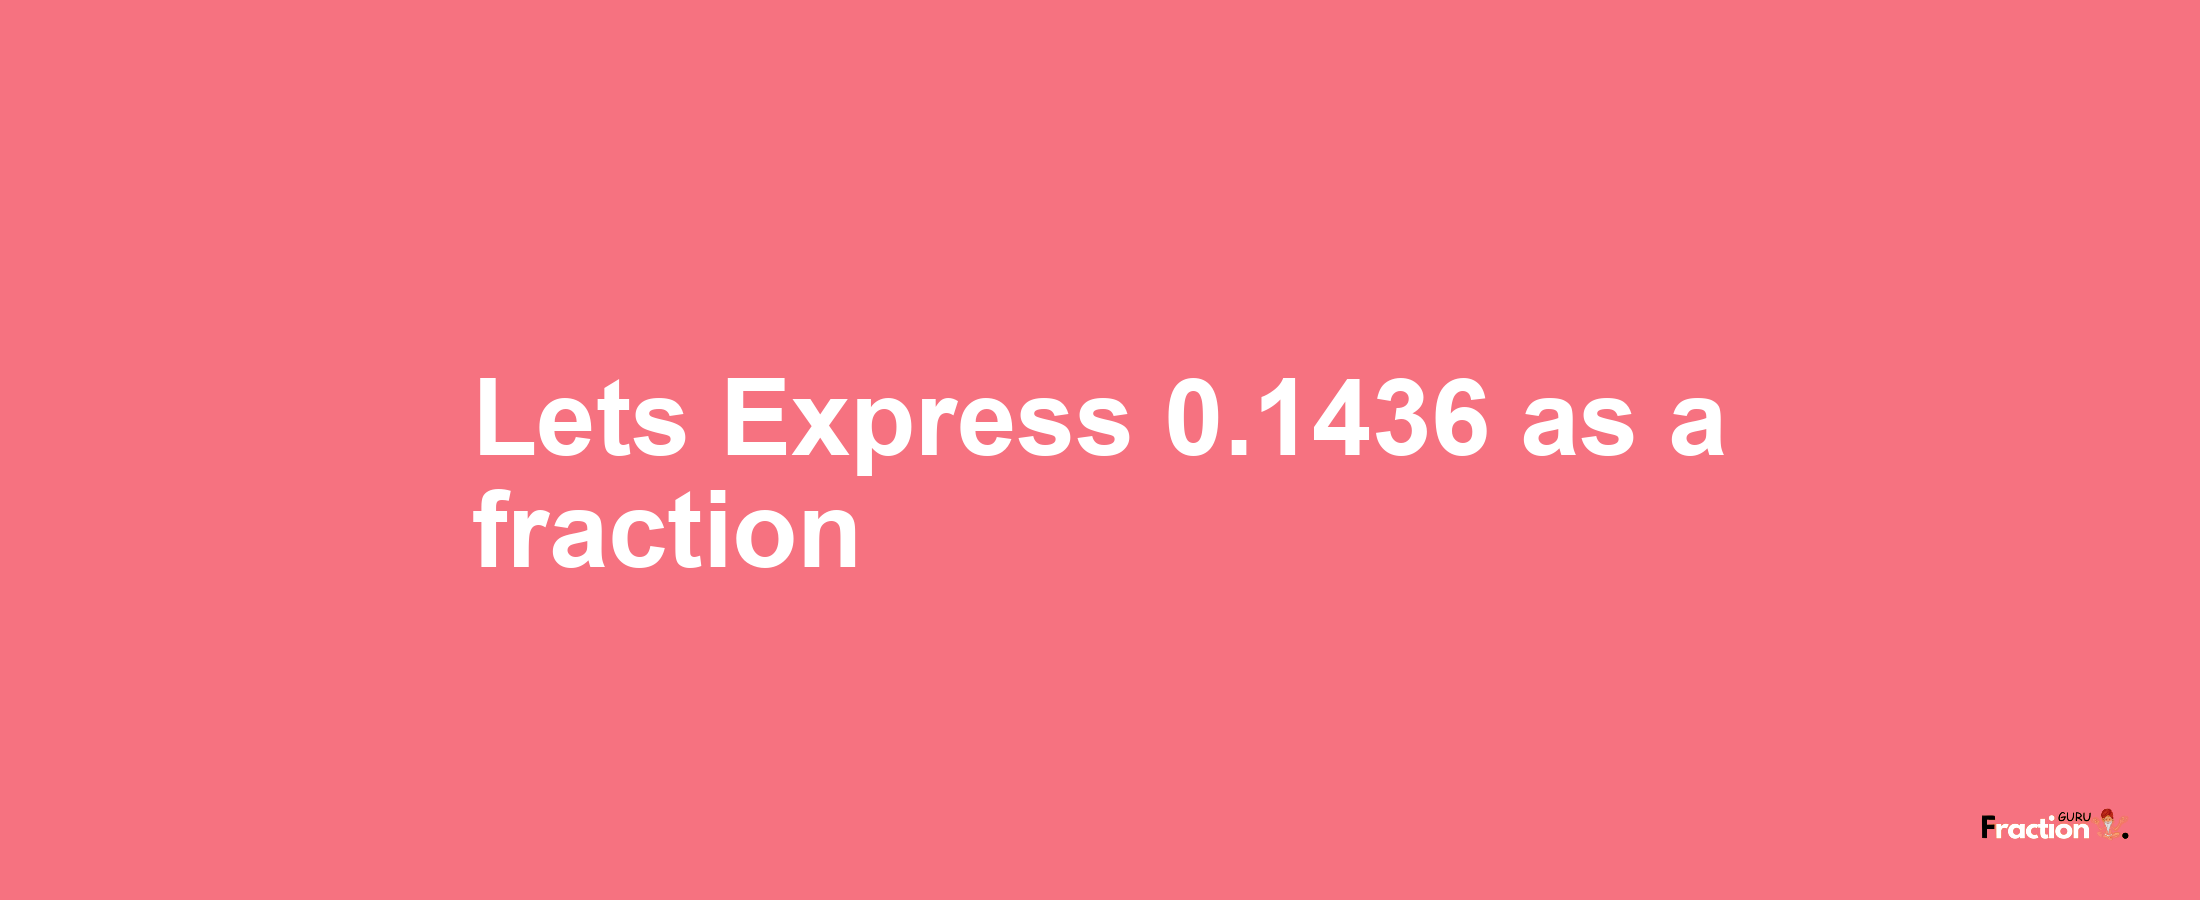 Lets Express 0.1436 as afraction